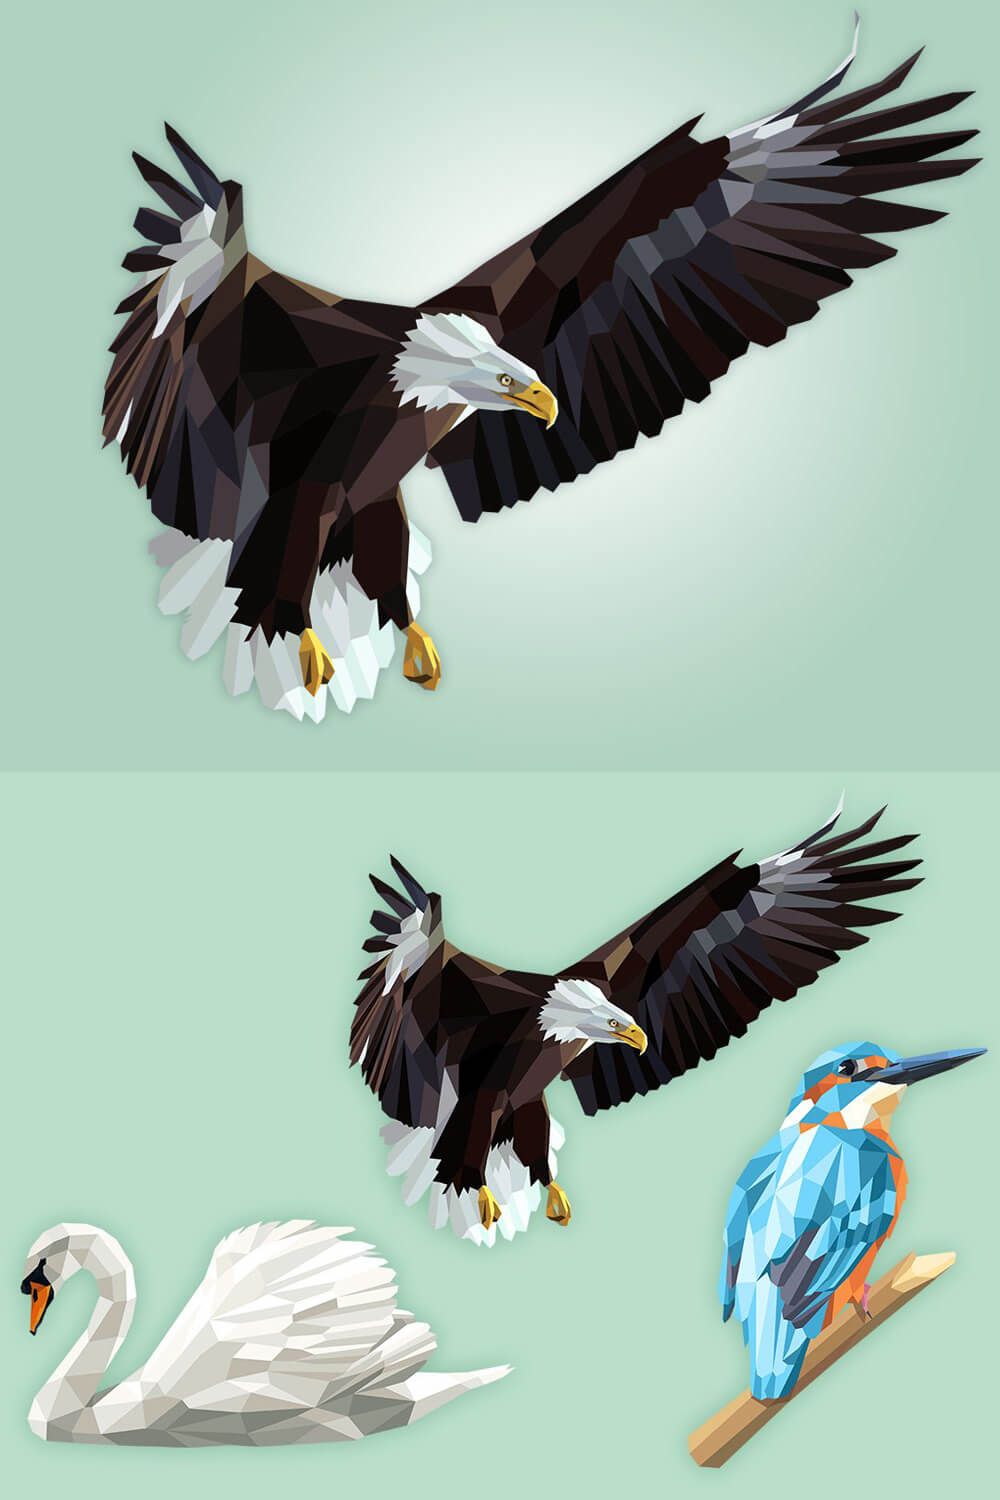 Drawing with two birds, an eagle close-up at the top of the image and an eagle with a swan and an exotic bird.